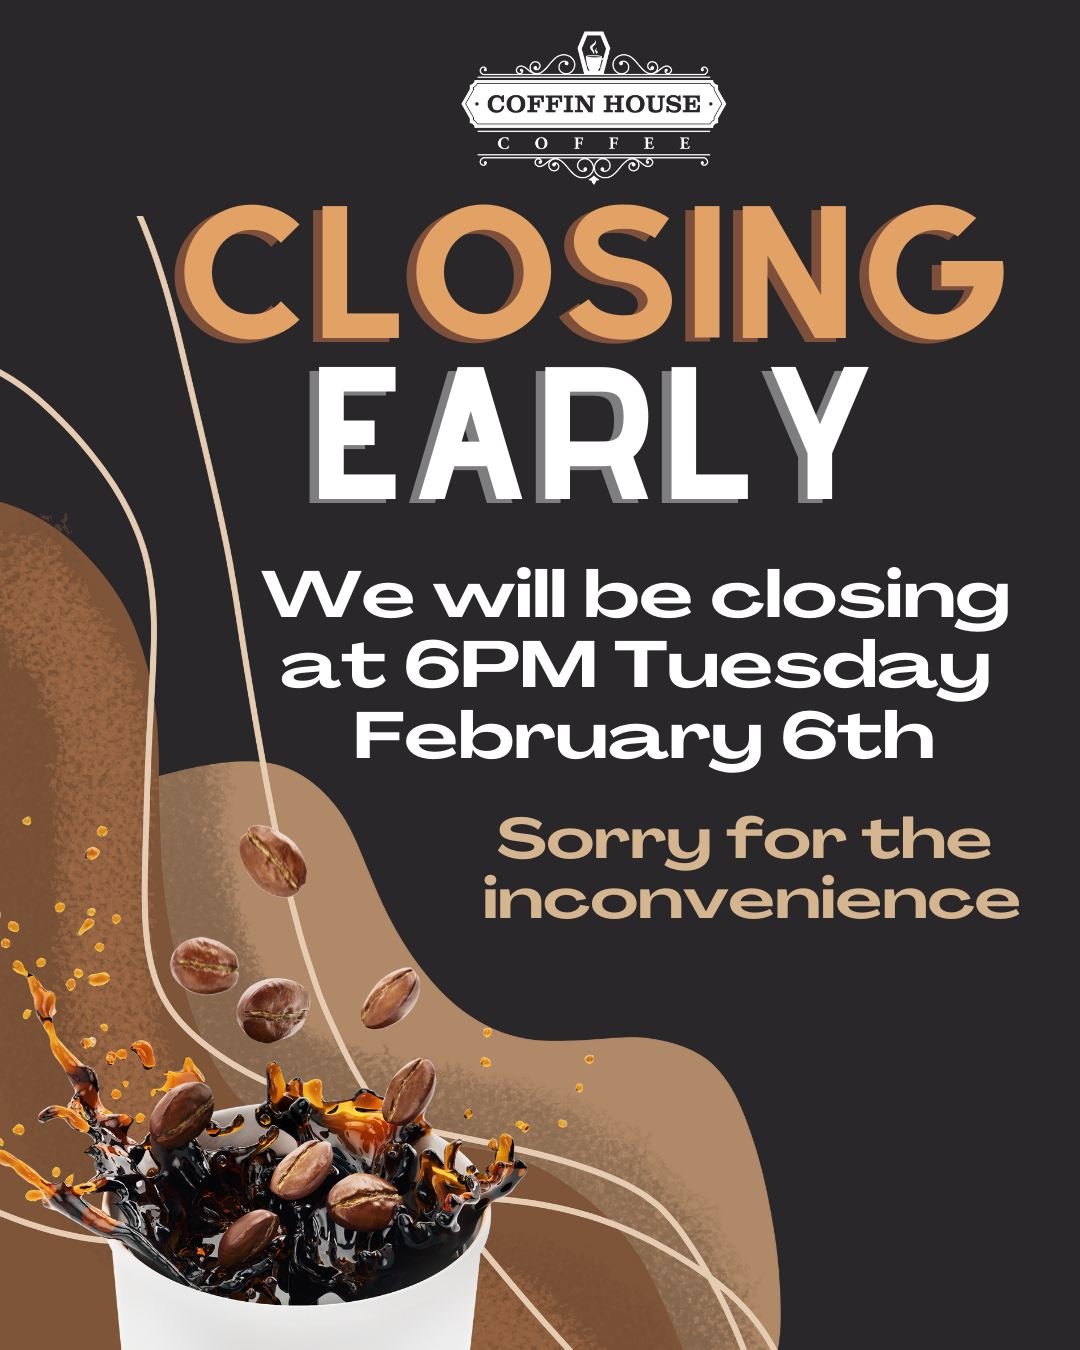 We will be closing early tonight at 6PM. Thank you for understanding, we're sorry for the inconvenience. 
☕
We'll see you tomorrow at 7AM serving some Milk &amp; Cookies February specials:
Irish Love Elixir - Oatmeal Cookie
Nutty Heartbreaker - Macad